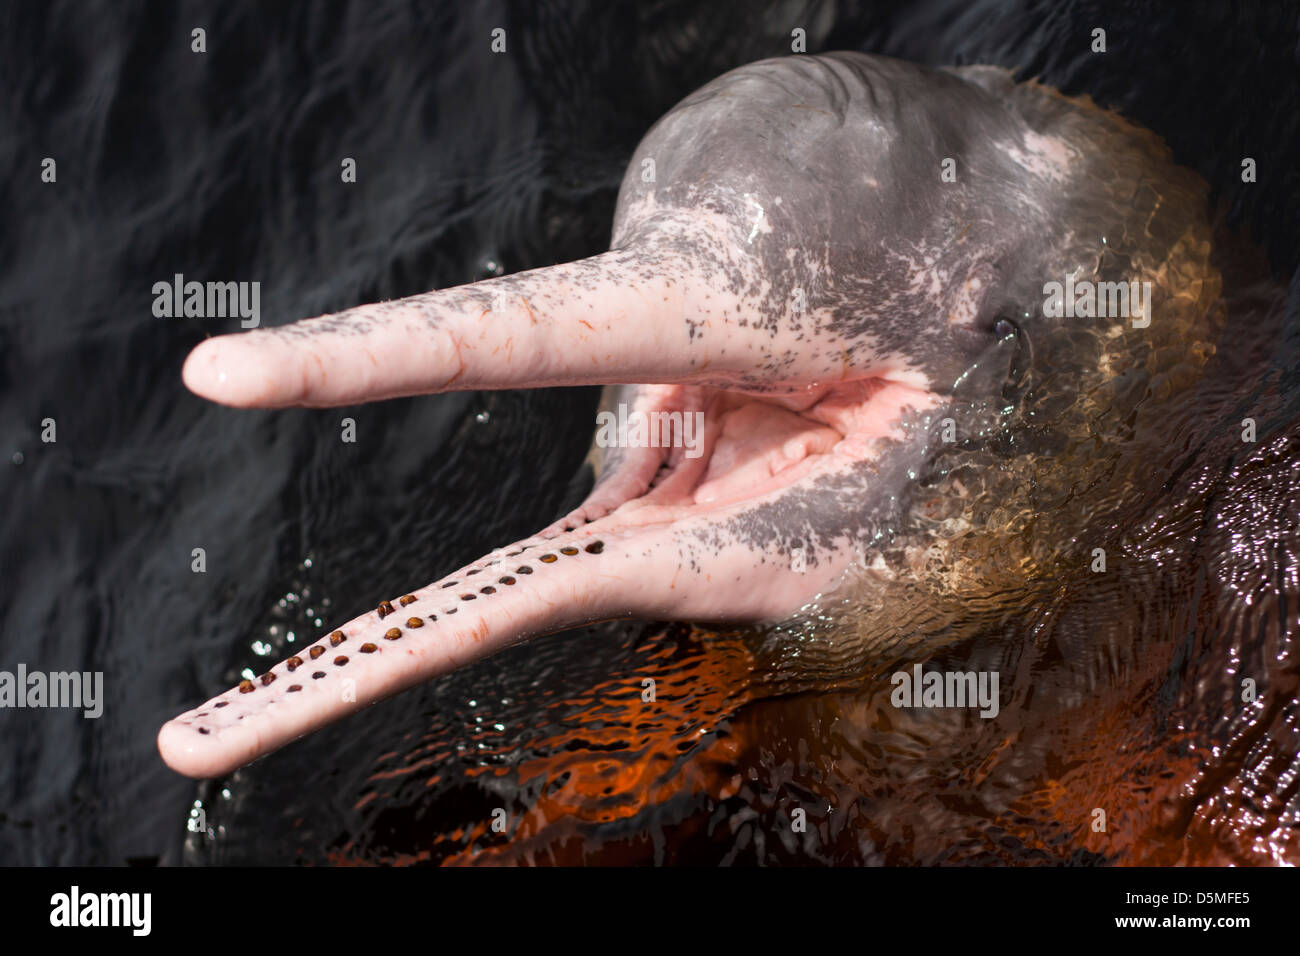 river porpoise at surface showing head and open mouth.  Amazon forest, black river, close to Novo Airão city, Amazonas, Brazil. Stock Photo